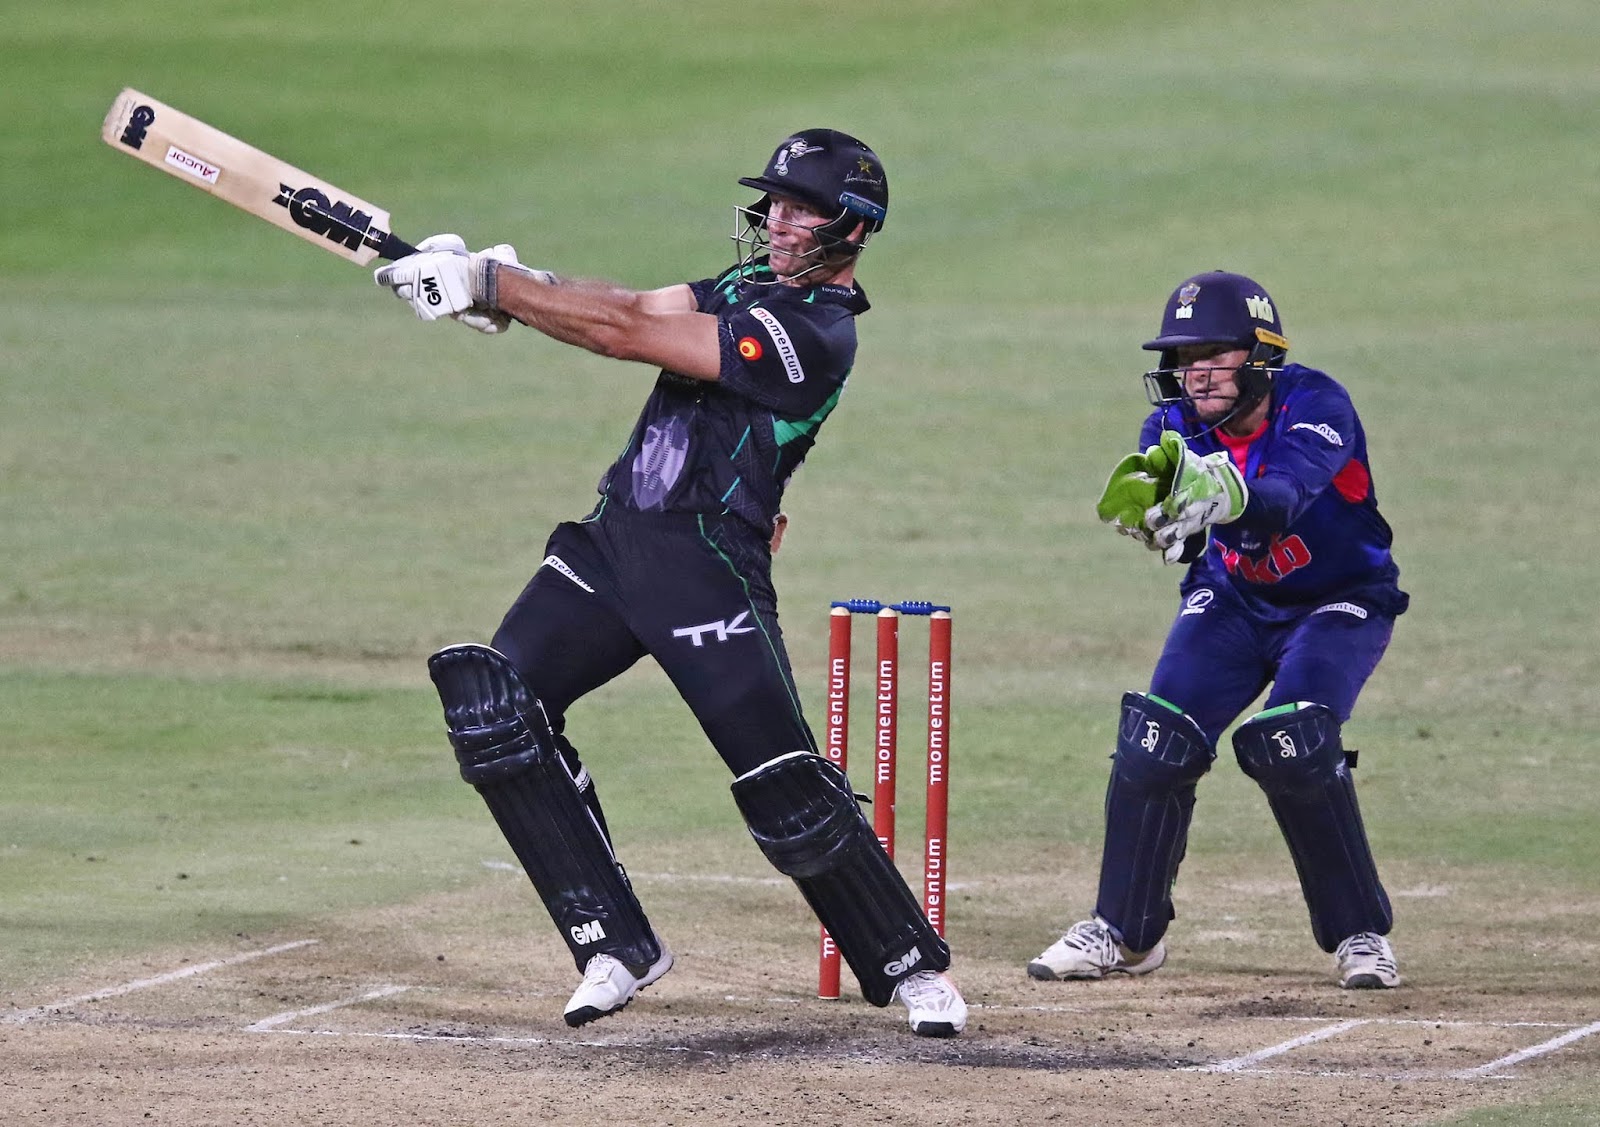 Sarel Erwee - Hollywoodbets Dolphins - Cricket